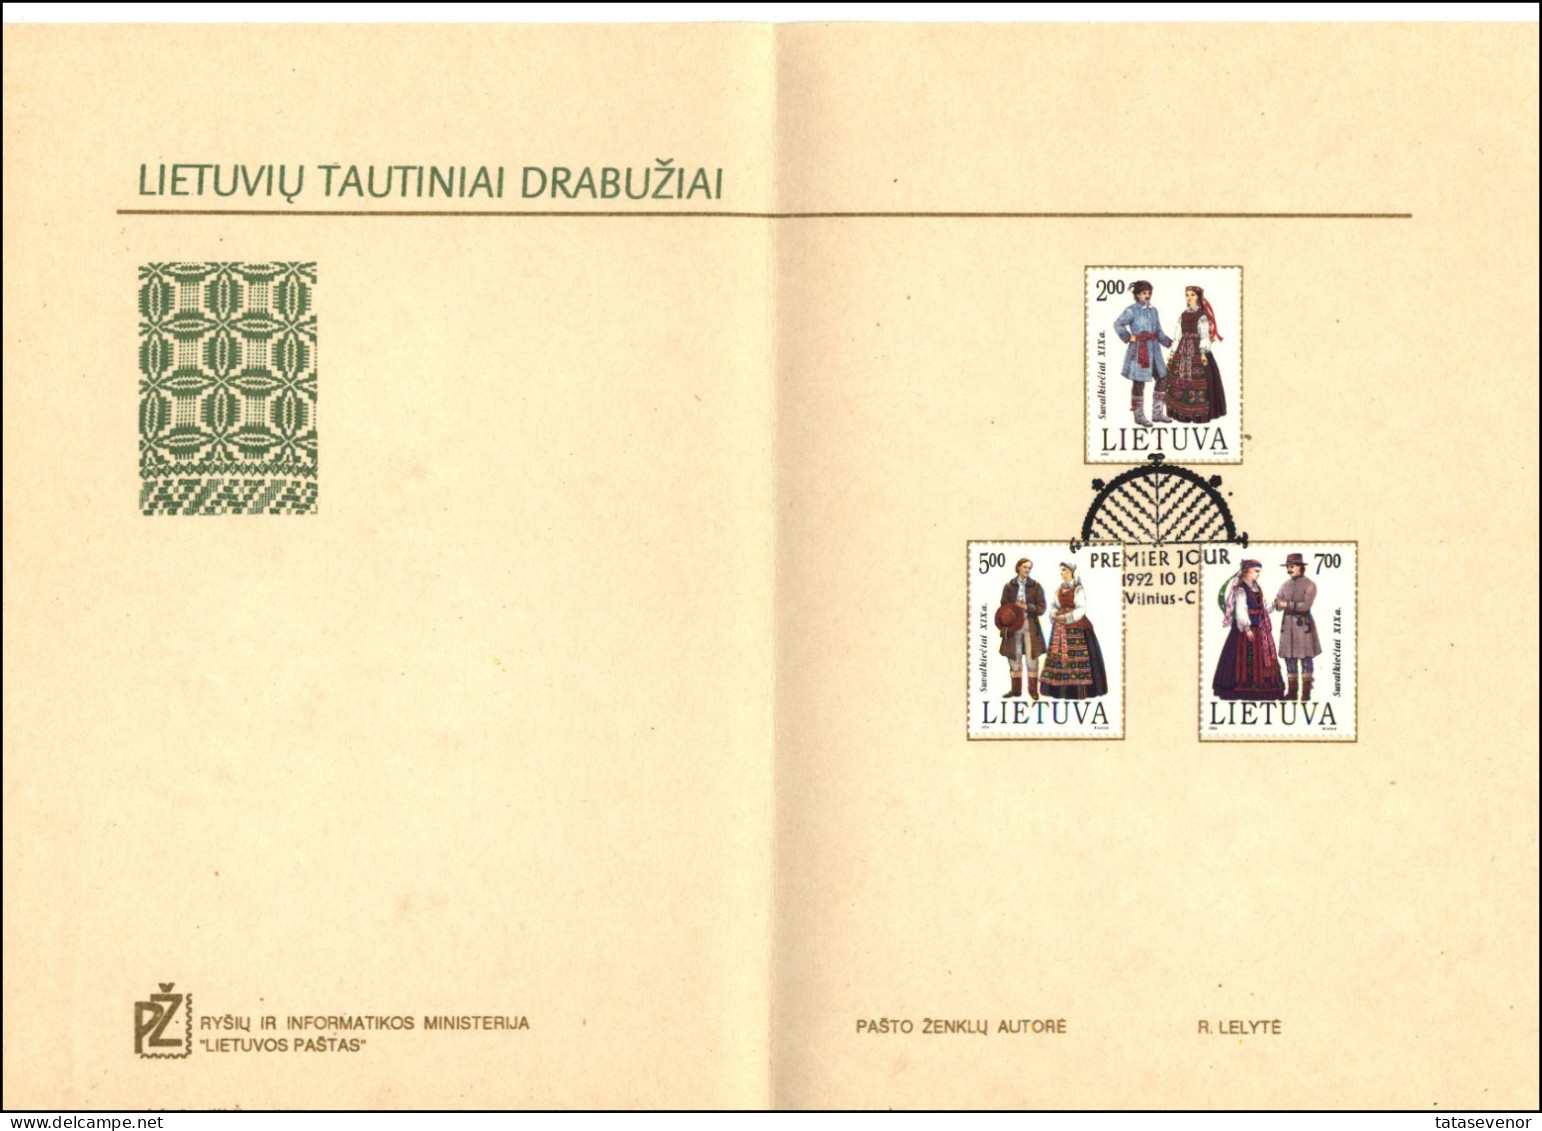 LITHUANIA B2 sellection of stamps in presentation folders. Some with artist signature